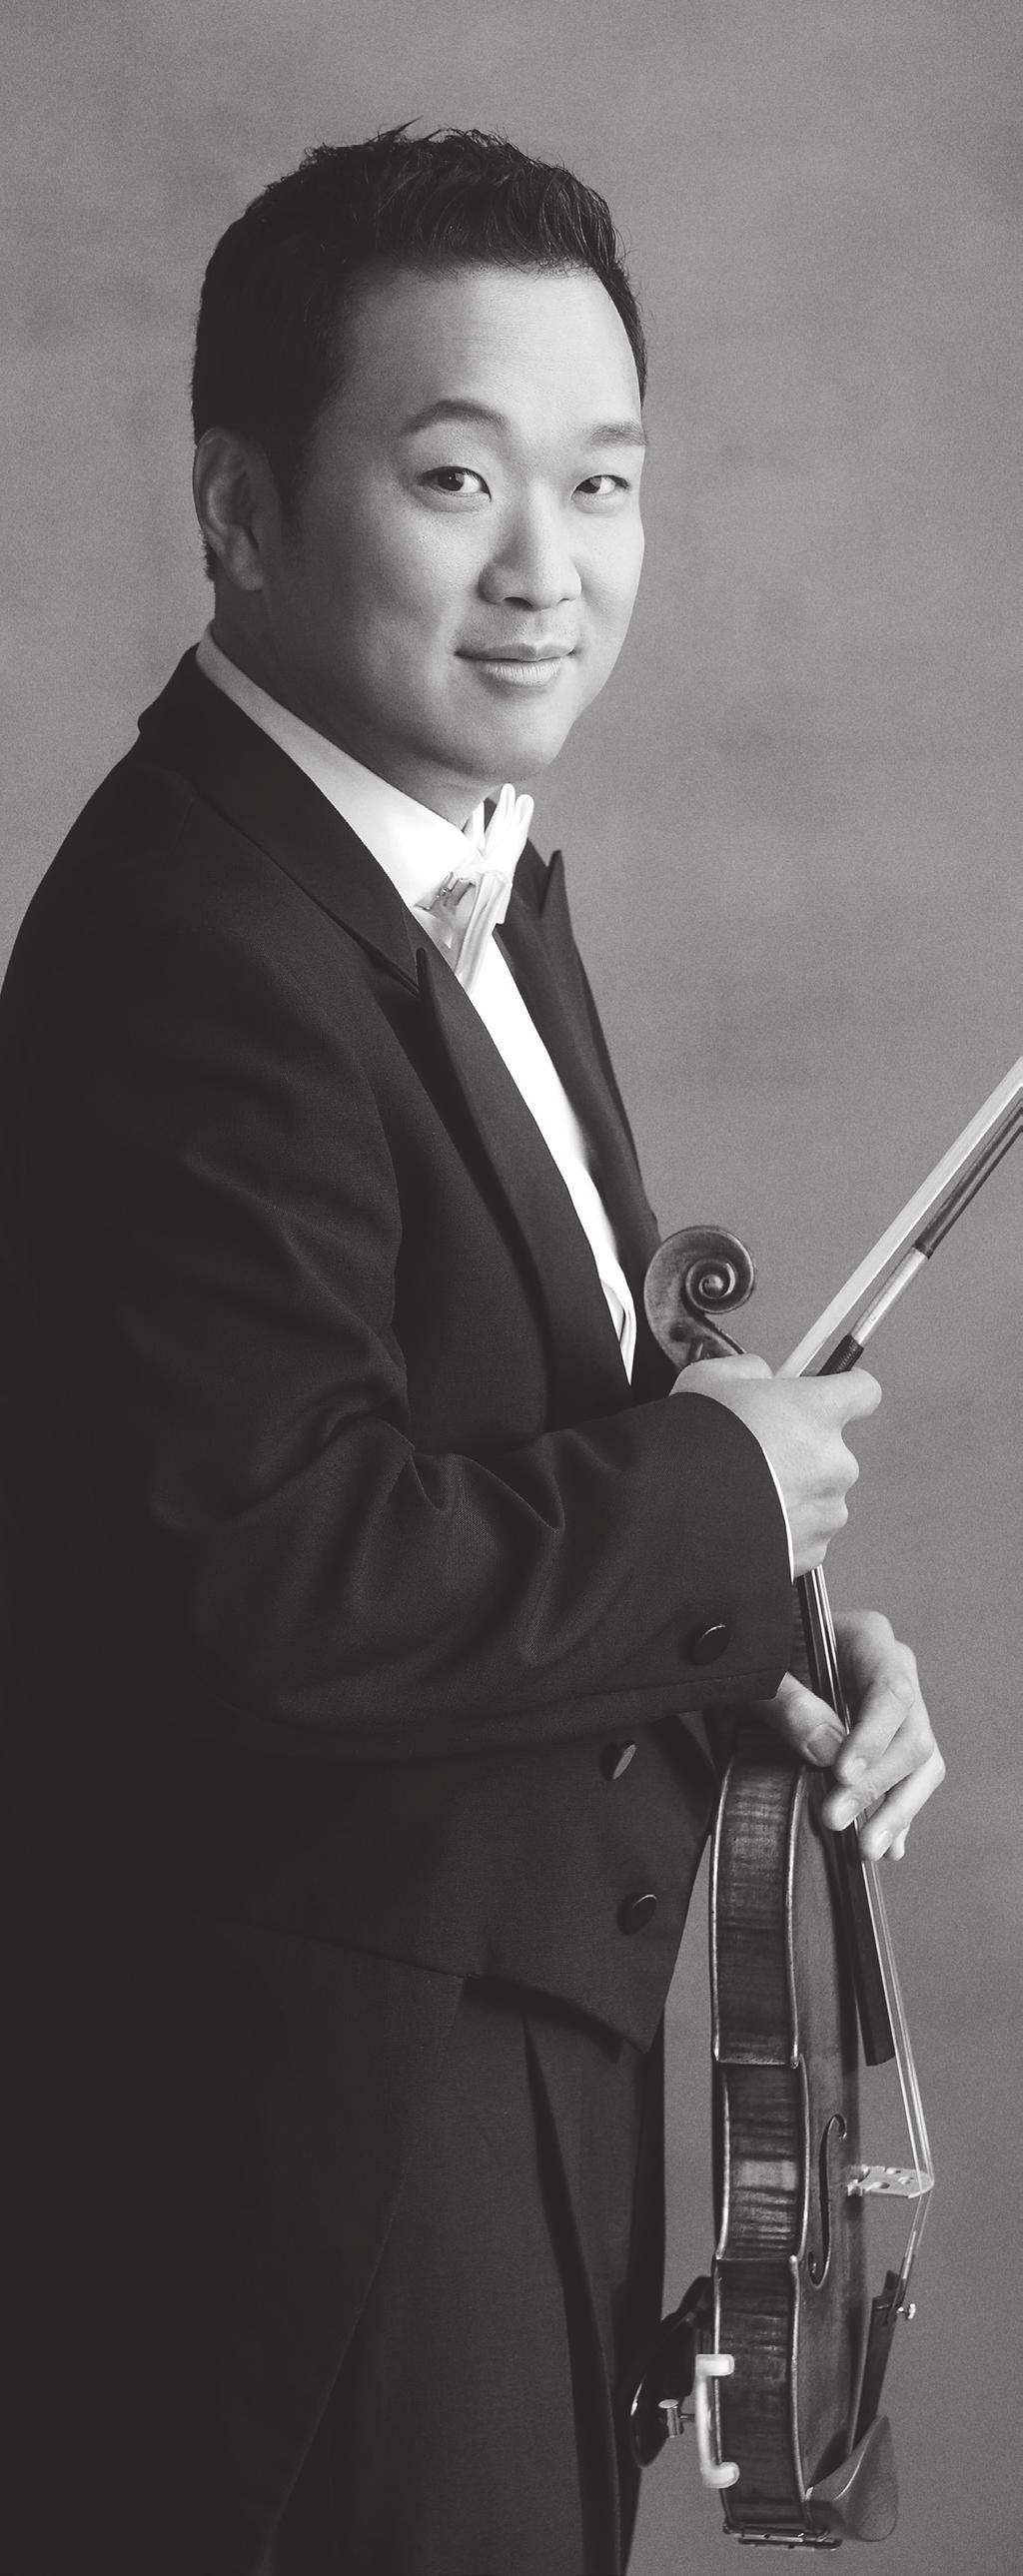 DENNIS KIM Dennis Kim is the new concertmaster of Pacific Symphony, performing his first concert in the position Sept. 8, 2018.